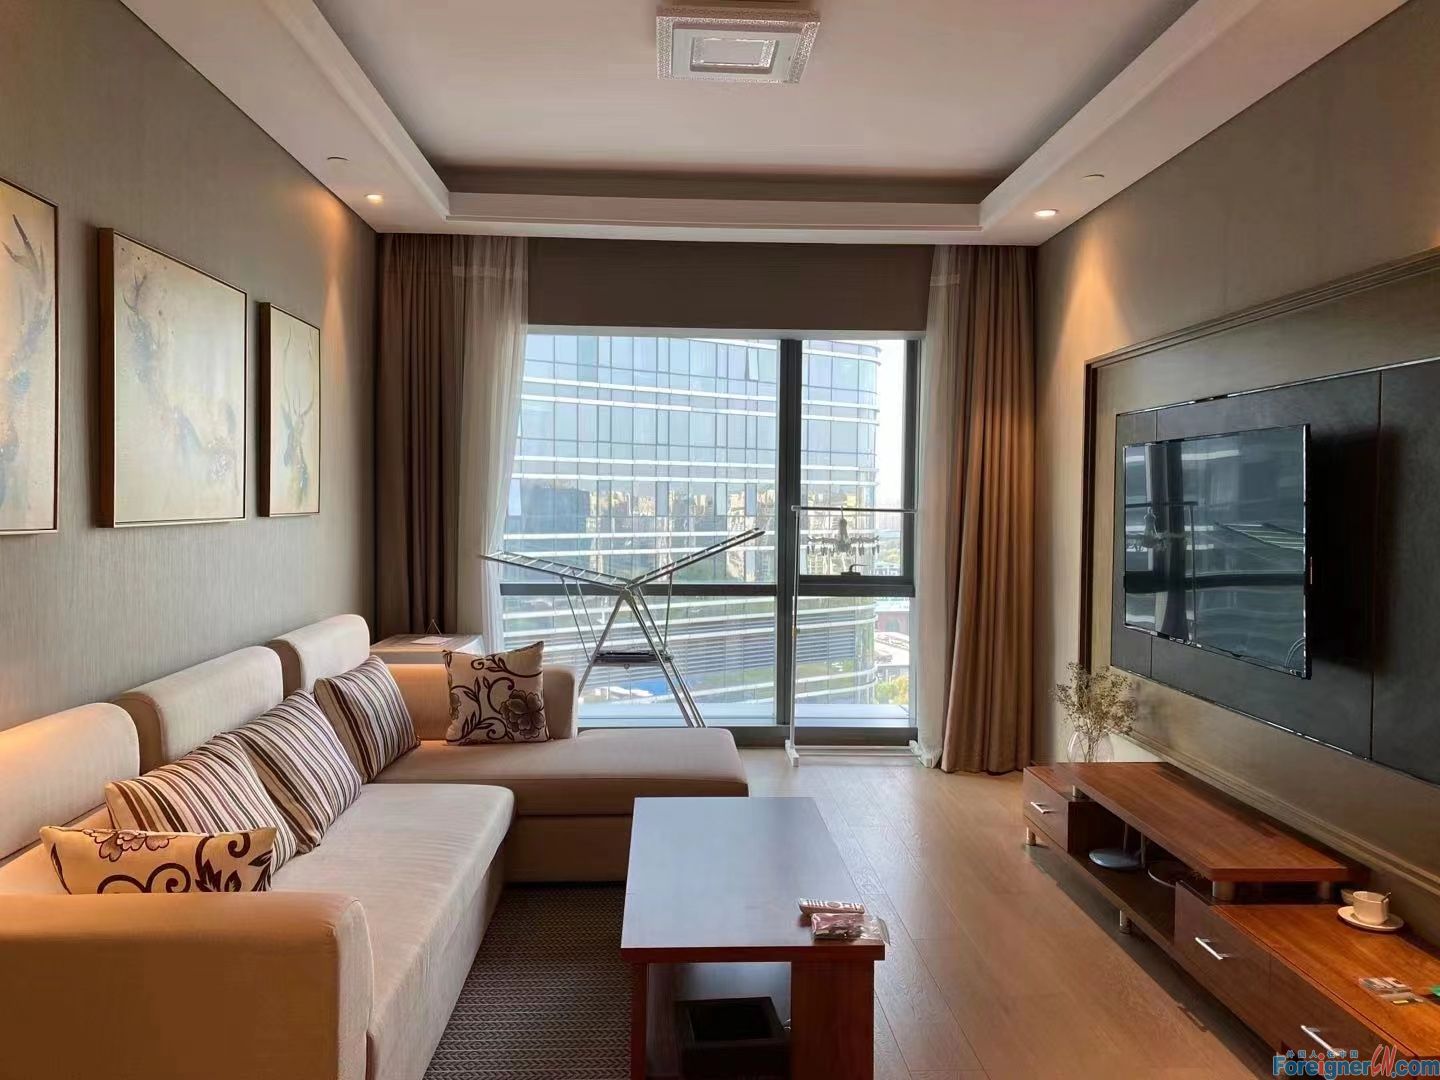 Fantastic! Luxurious HLCC Apartment Rent in SIP,Suzhou/ 1 bedroom and 1 bathroom/Newly renovated & Modern design/Close to Times Square,Subway station